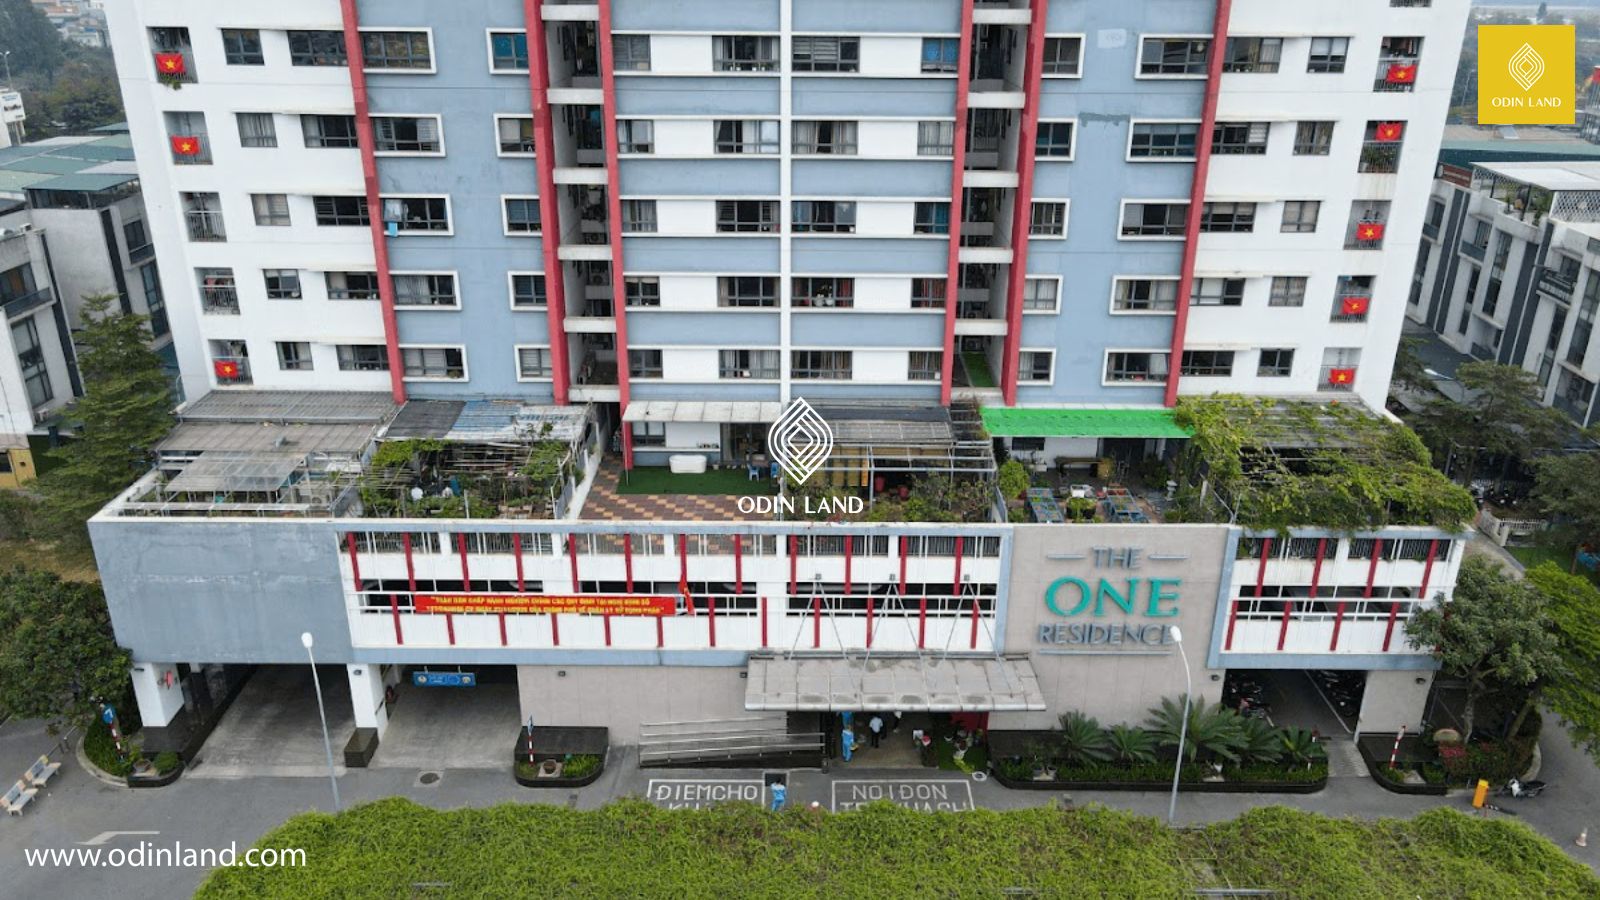 The One Residence